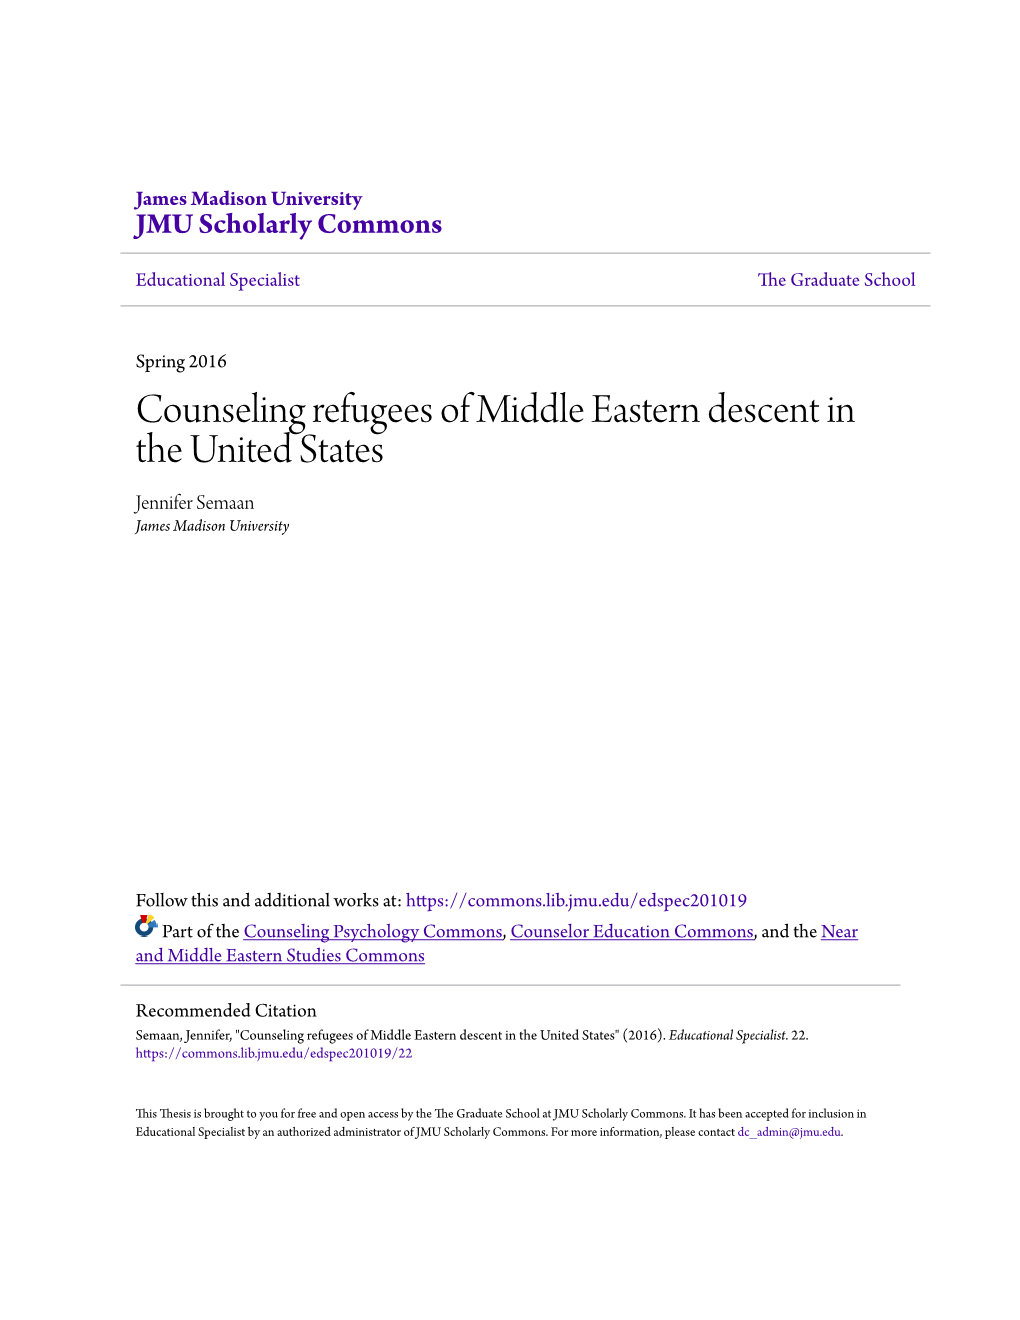 Counseling Refugees of Middle Eastern Descent in the United States Jennifer Semaan James Madison University